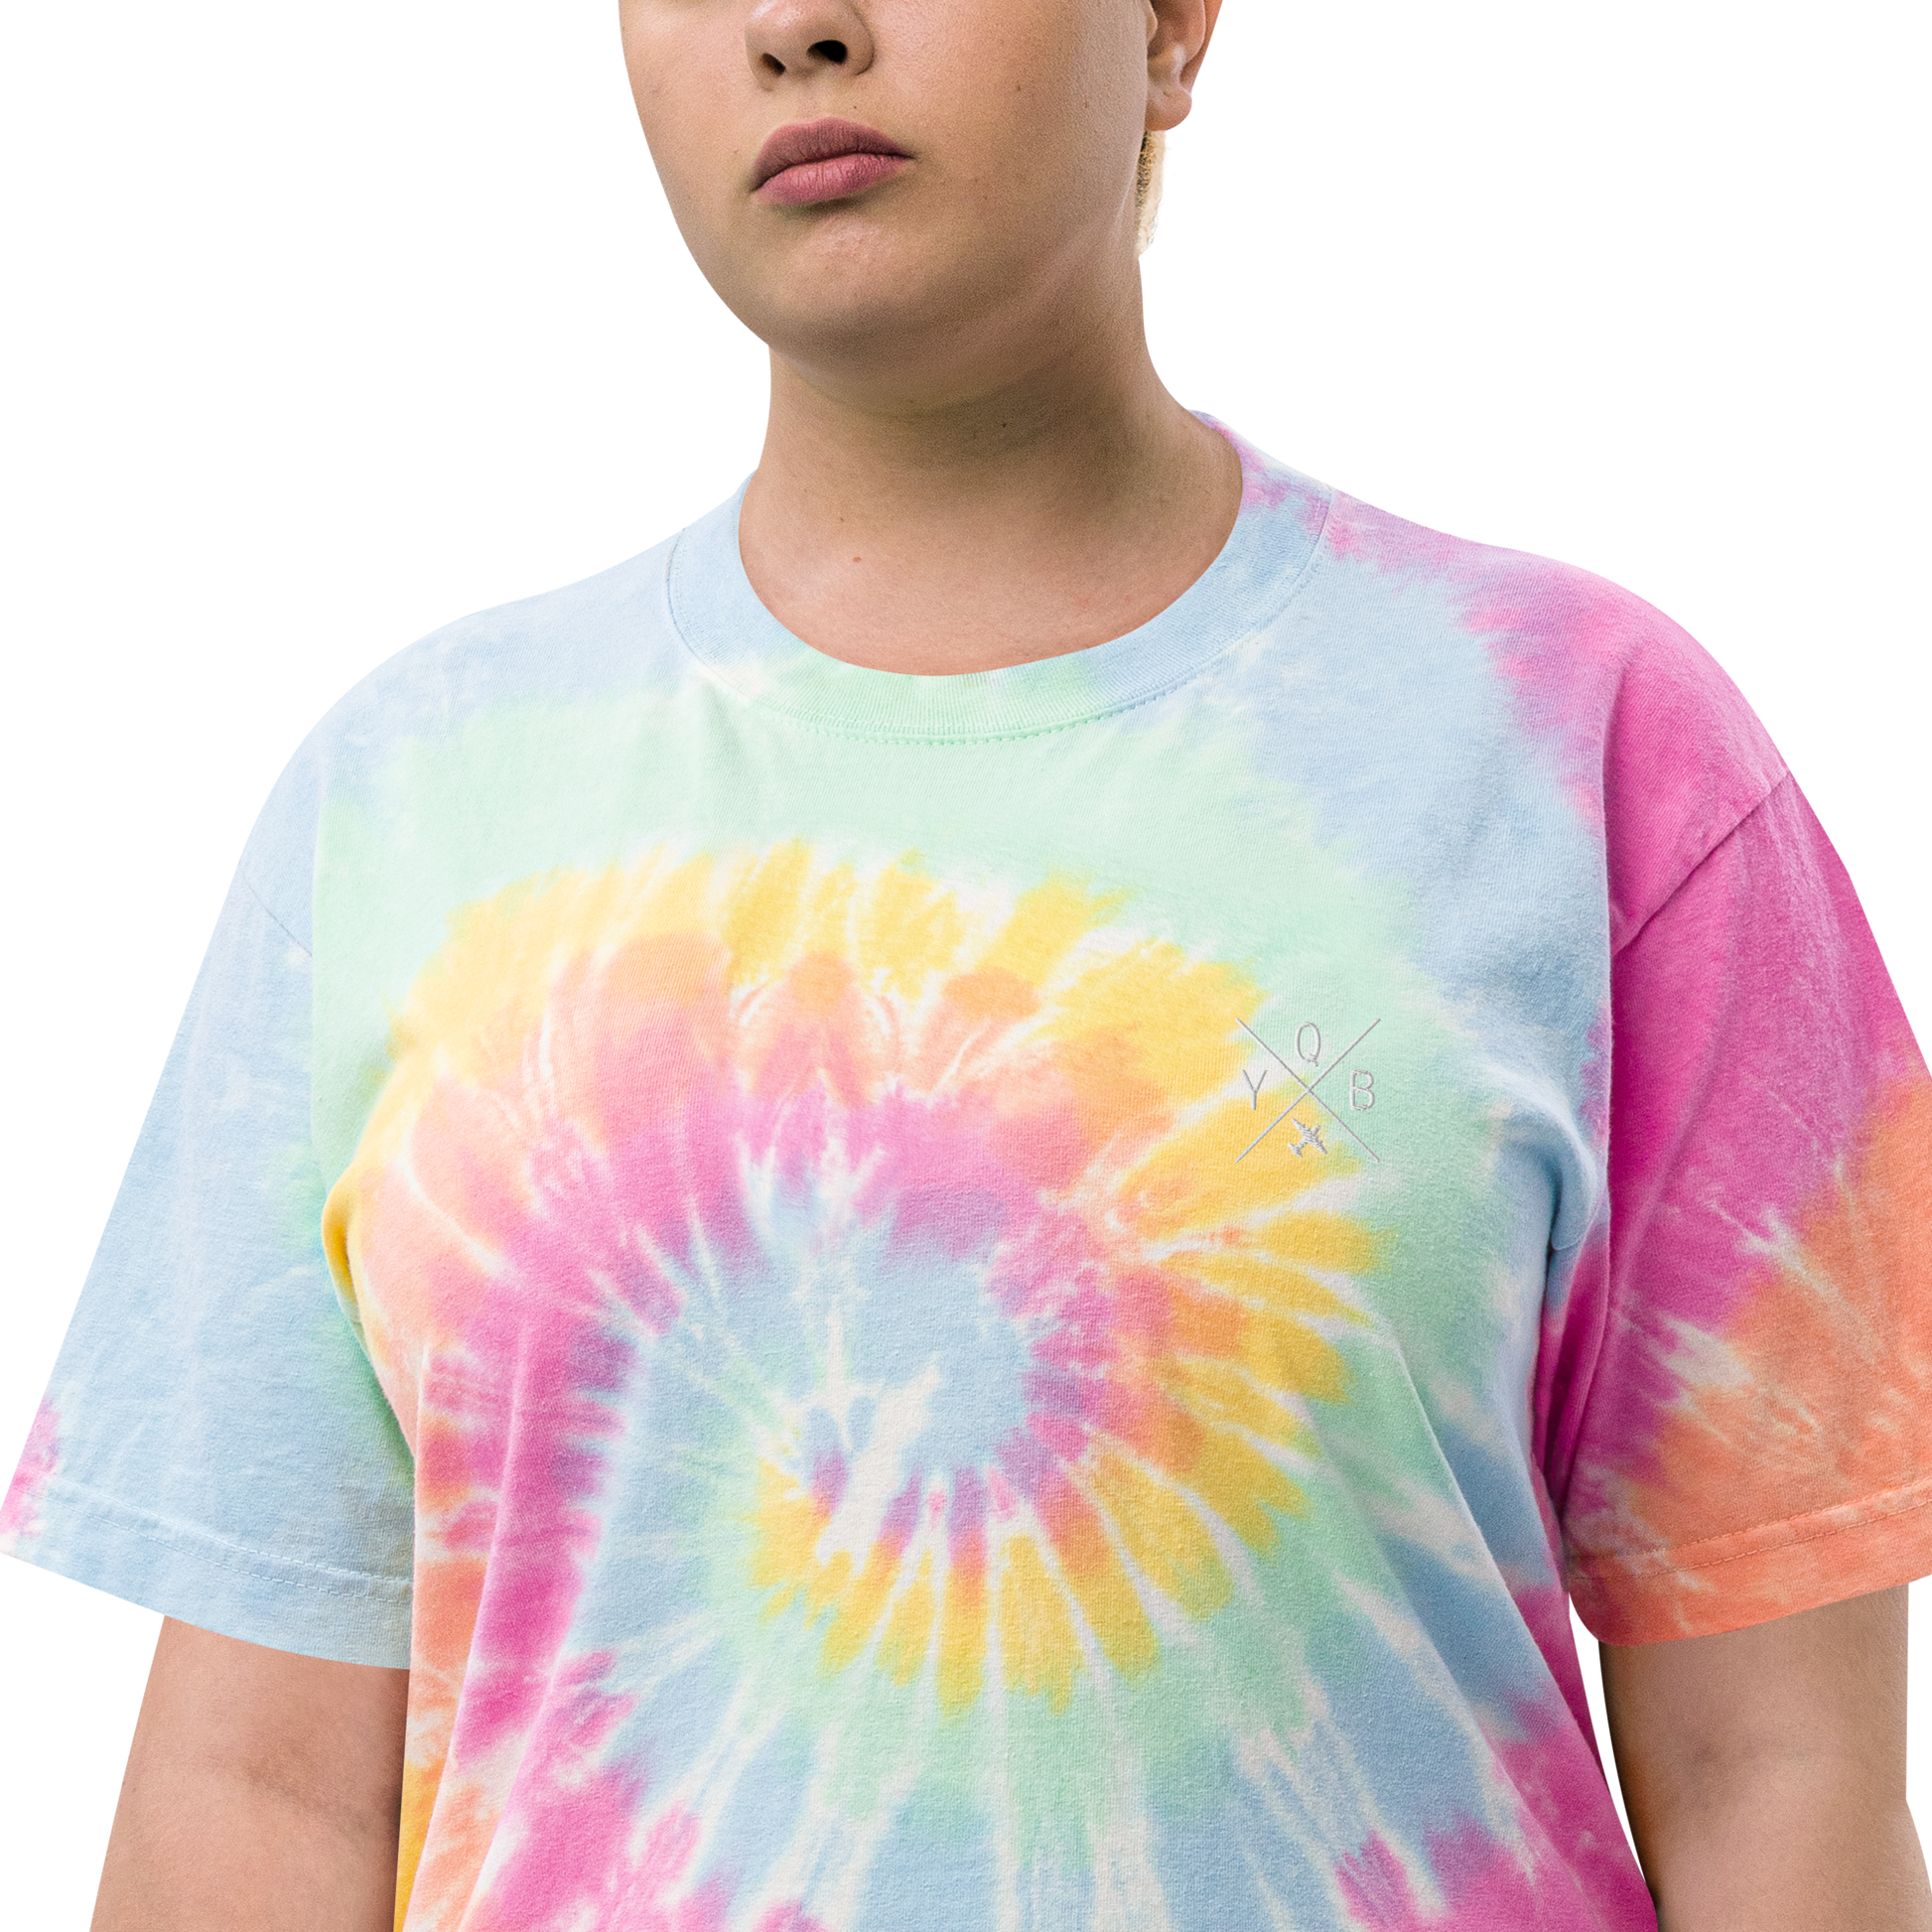 Crossed-X Oversized Tie-Dye T-Shirt • YQB Quebec City • YHM Designs - Image 13